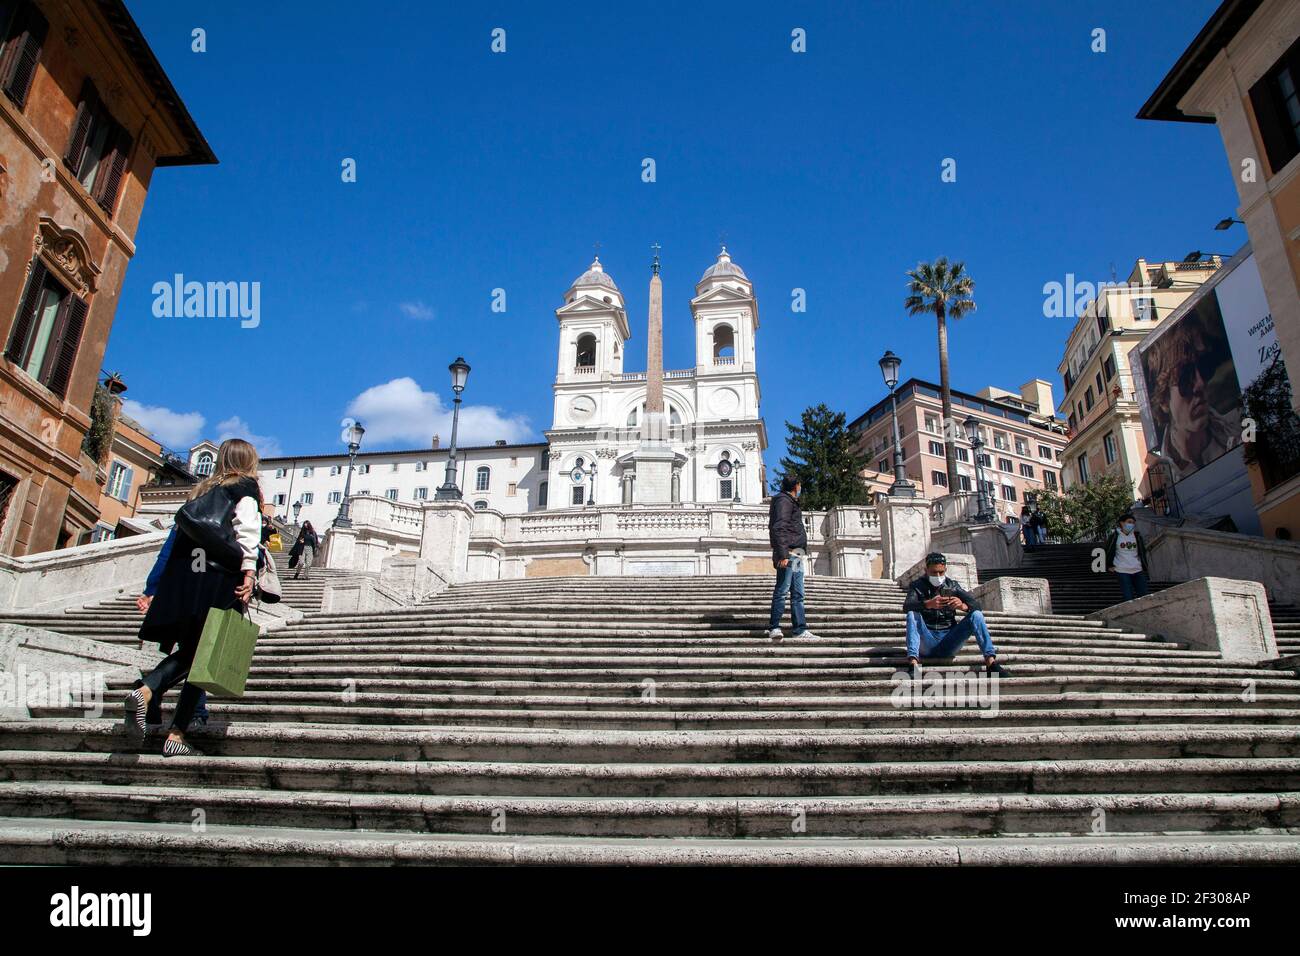 Rome, ITALY- 13 March 2021: People enjoy a sunny day by the Spanish Steps on Piazza di Spagna in downtown Rome before the government tightens restrictions across most of the country from March 15, facing a 'new wave' of Covid-19 Stock Photo